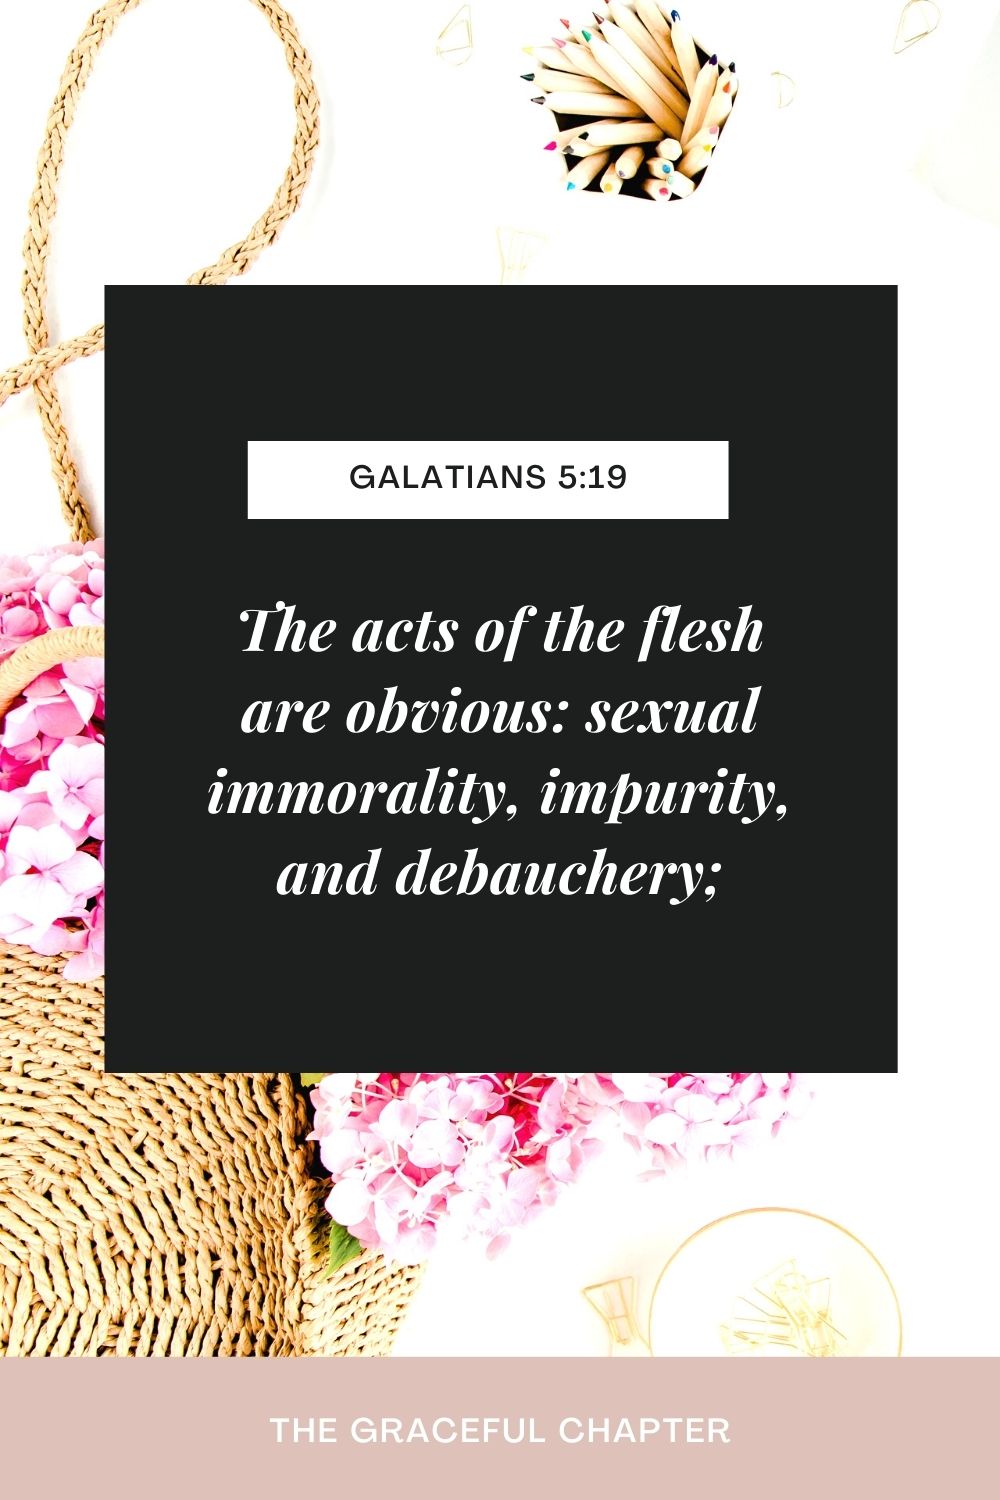 The acts of the flesh are obvious: sexual immorality, impurity, and debauchery; Galatians 5:19